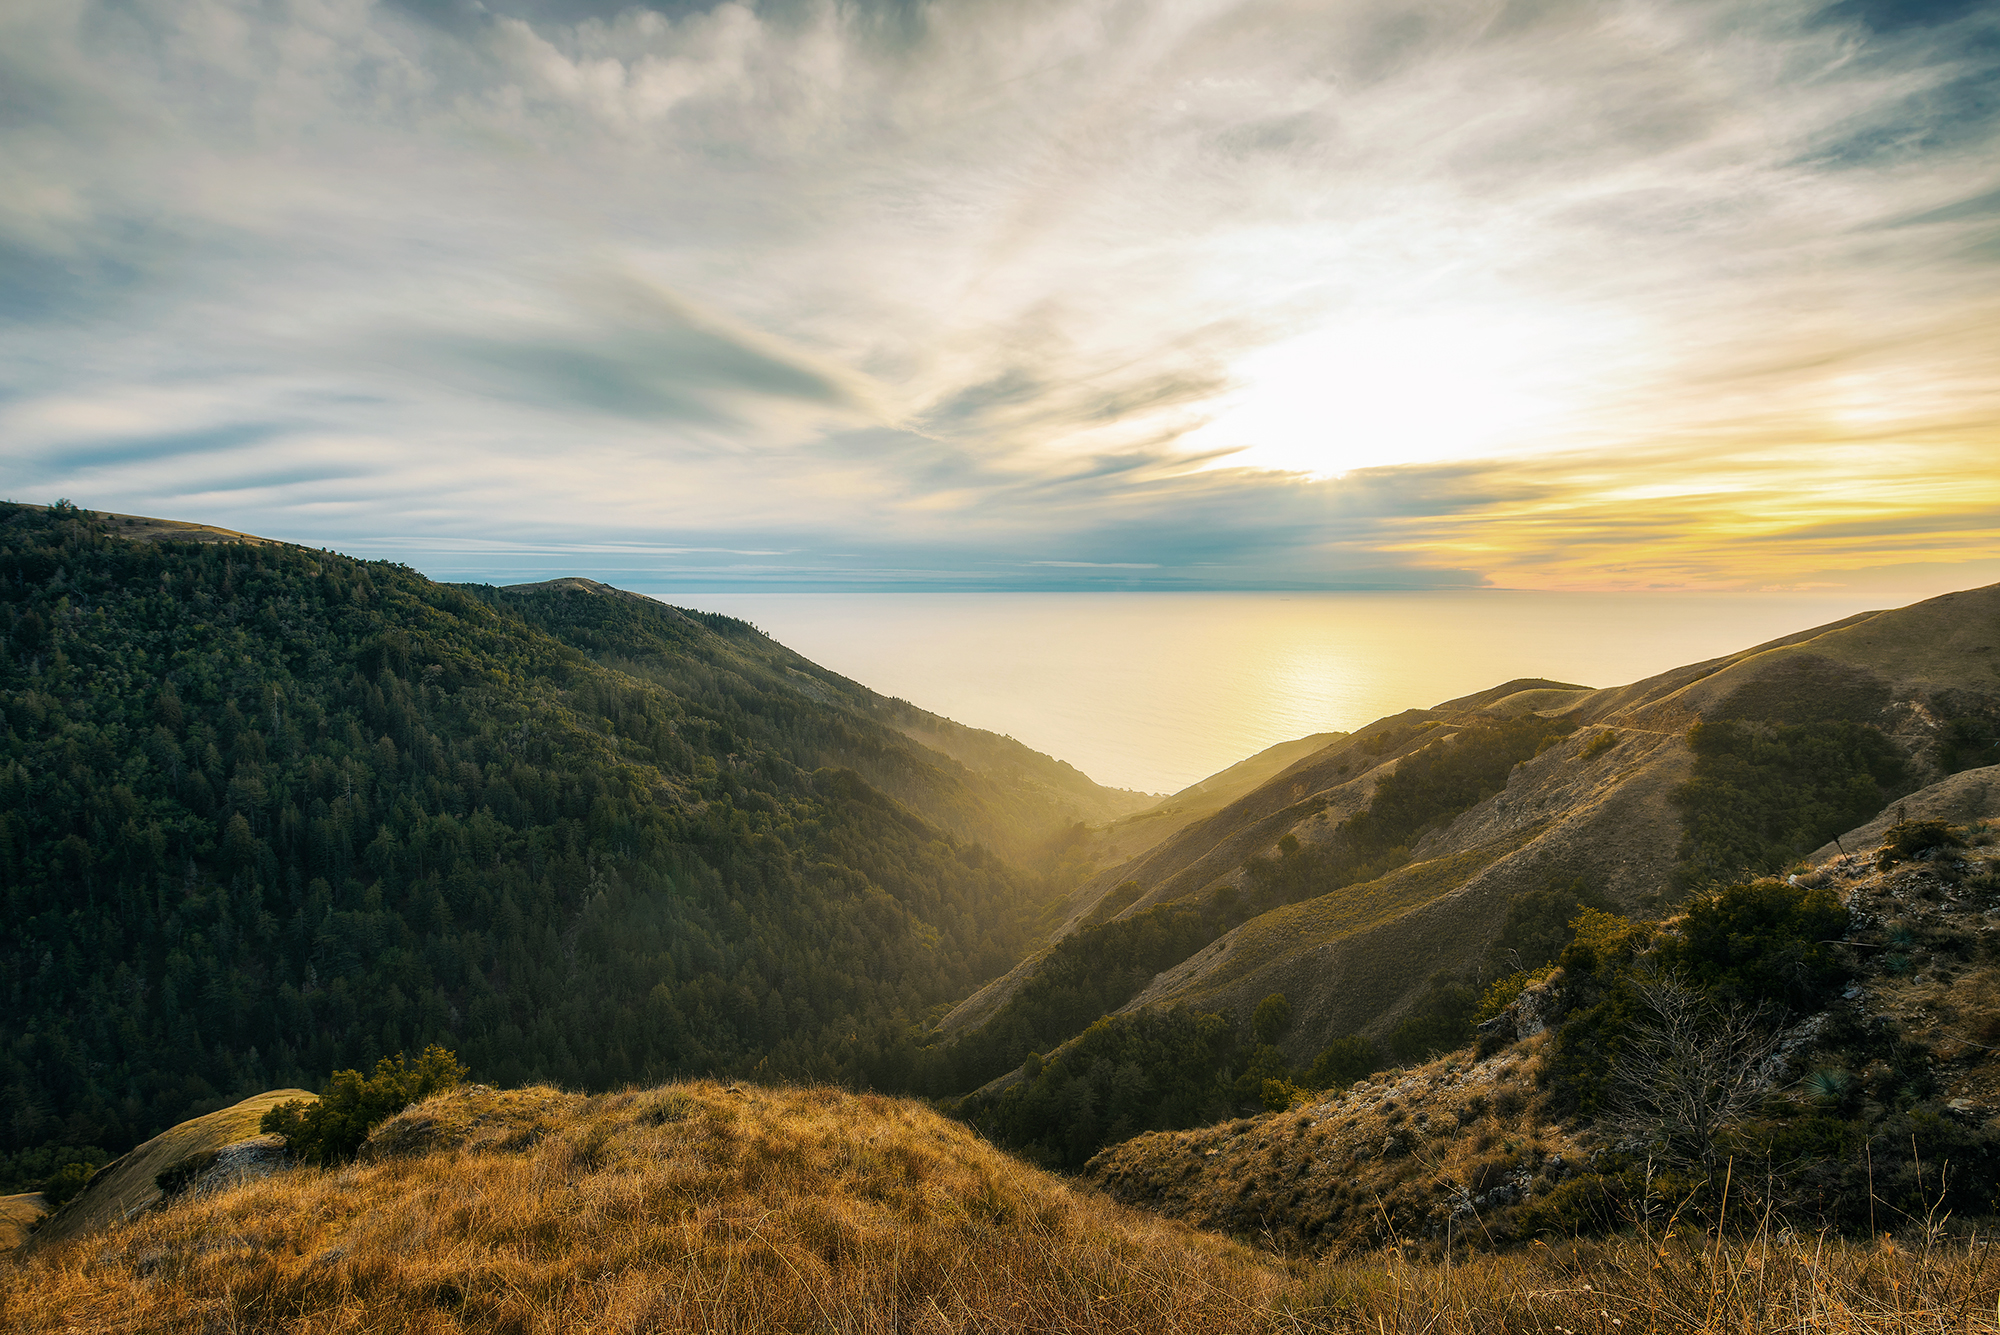 Sunset over the Pacific Ocean seen from the Nacimiento-Fergusson road through the Santa Lucia Range in California